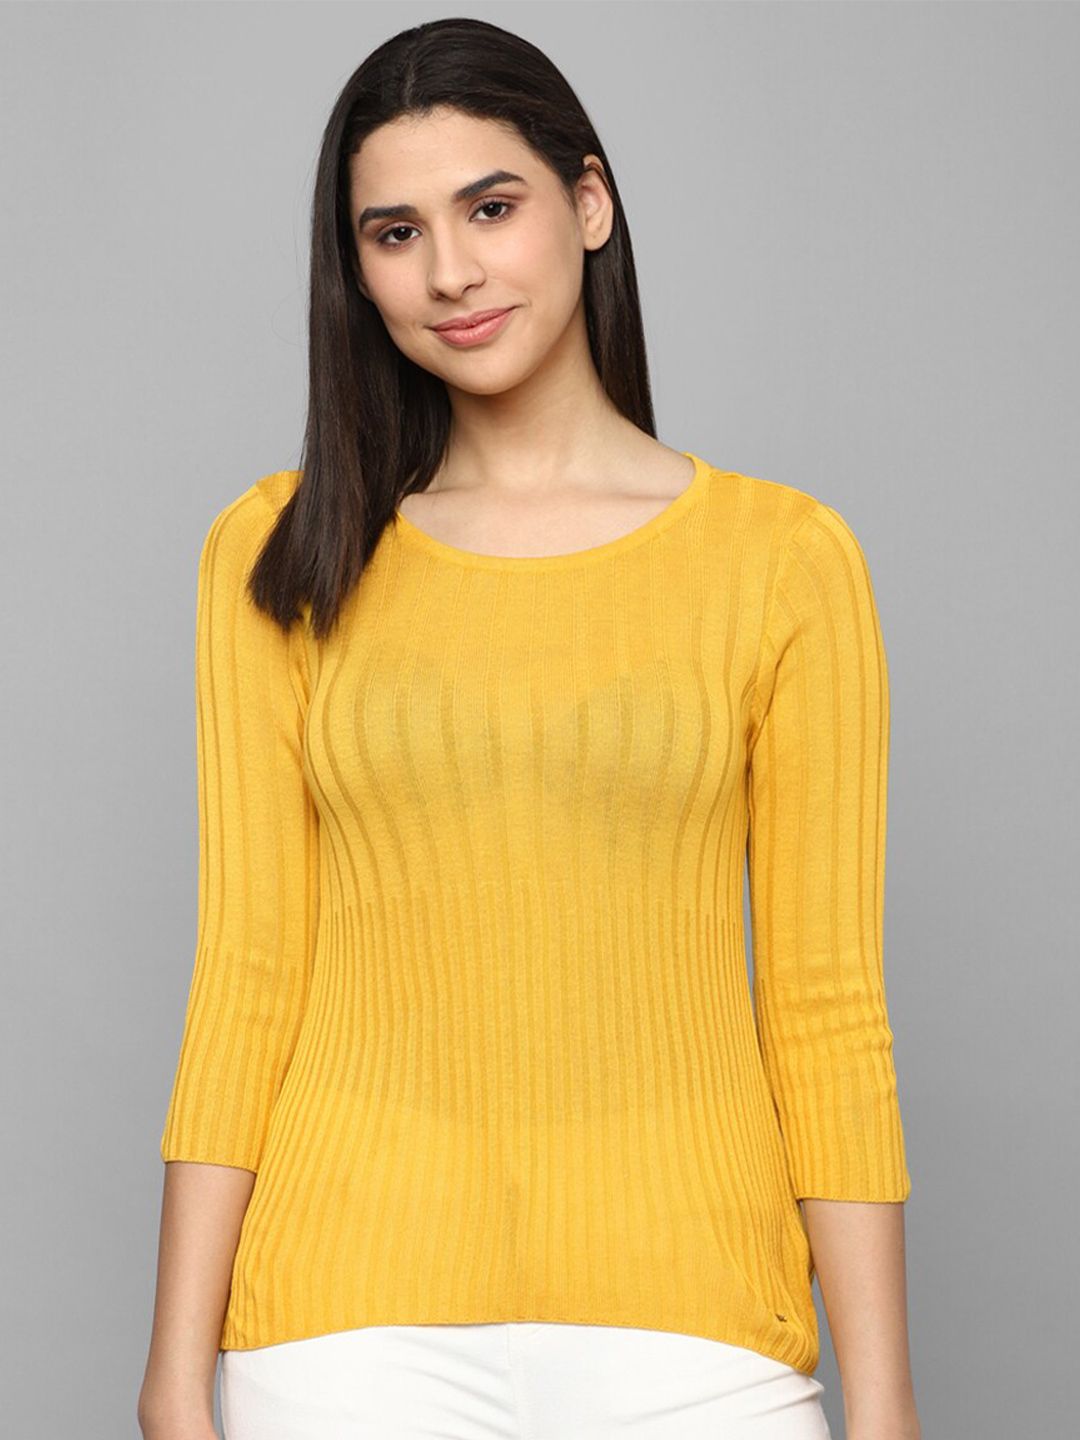 Allen Solly Woman Striped Fitted Top Price in India